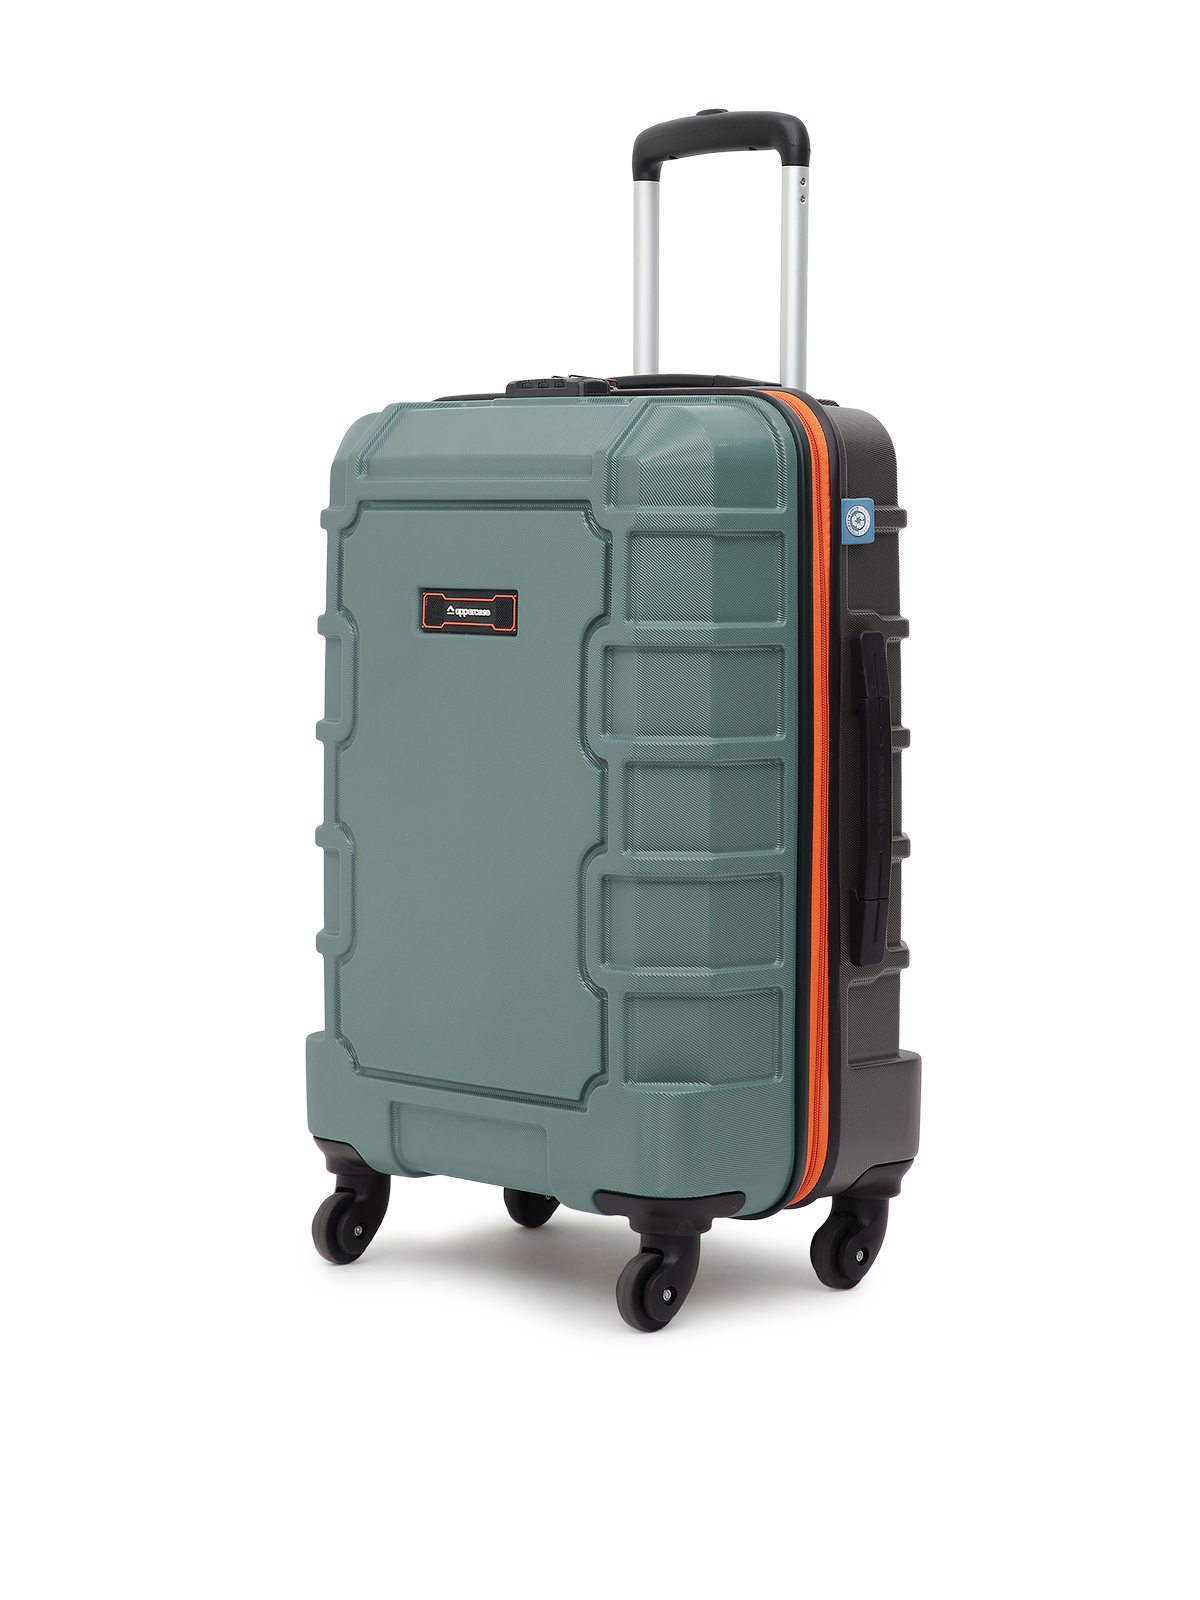 uppercase Arbor 66cm (Medium) | Check-in Trolley Bag | Sustainable Hardsided Luggage | Secure Combination Lock | Scratch Resistant | Mesh ConviPack | Suitcase for Men & Women | 2000 Days Warranty (Green)